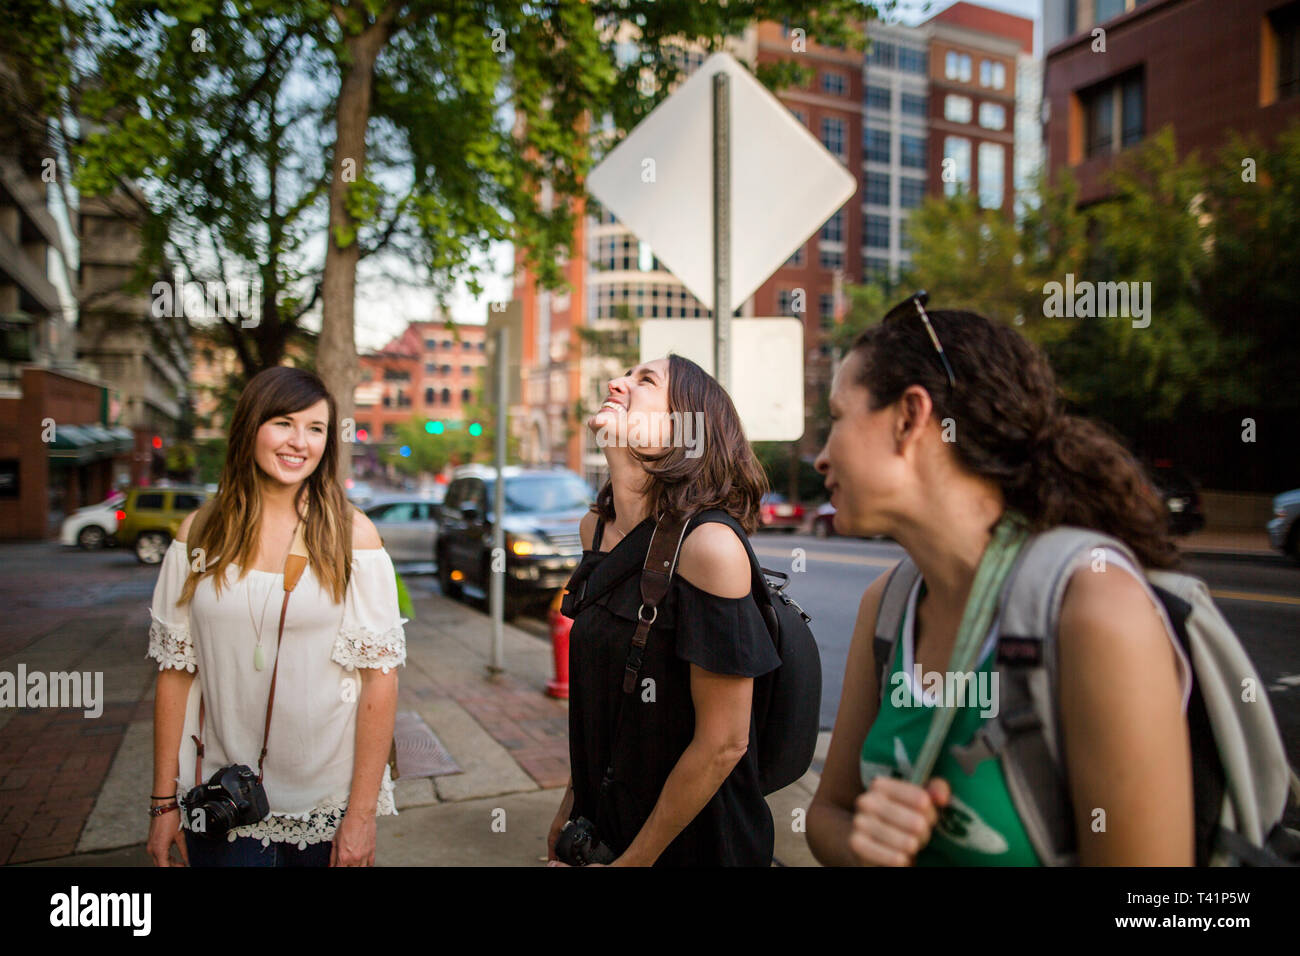 a group of laughing women tourists stand on a city street corner Stock Photo